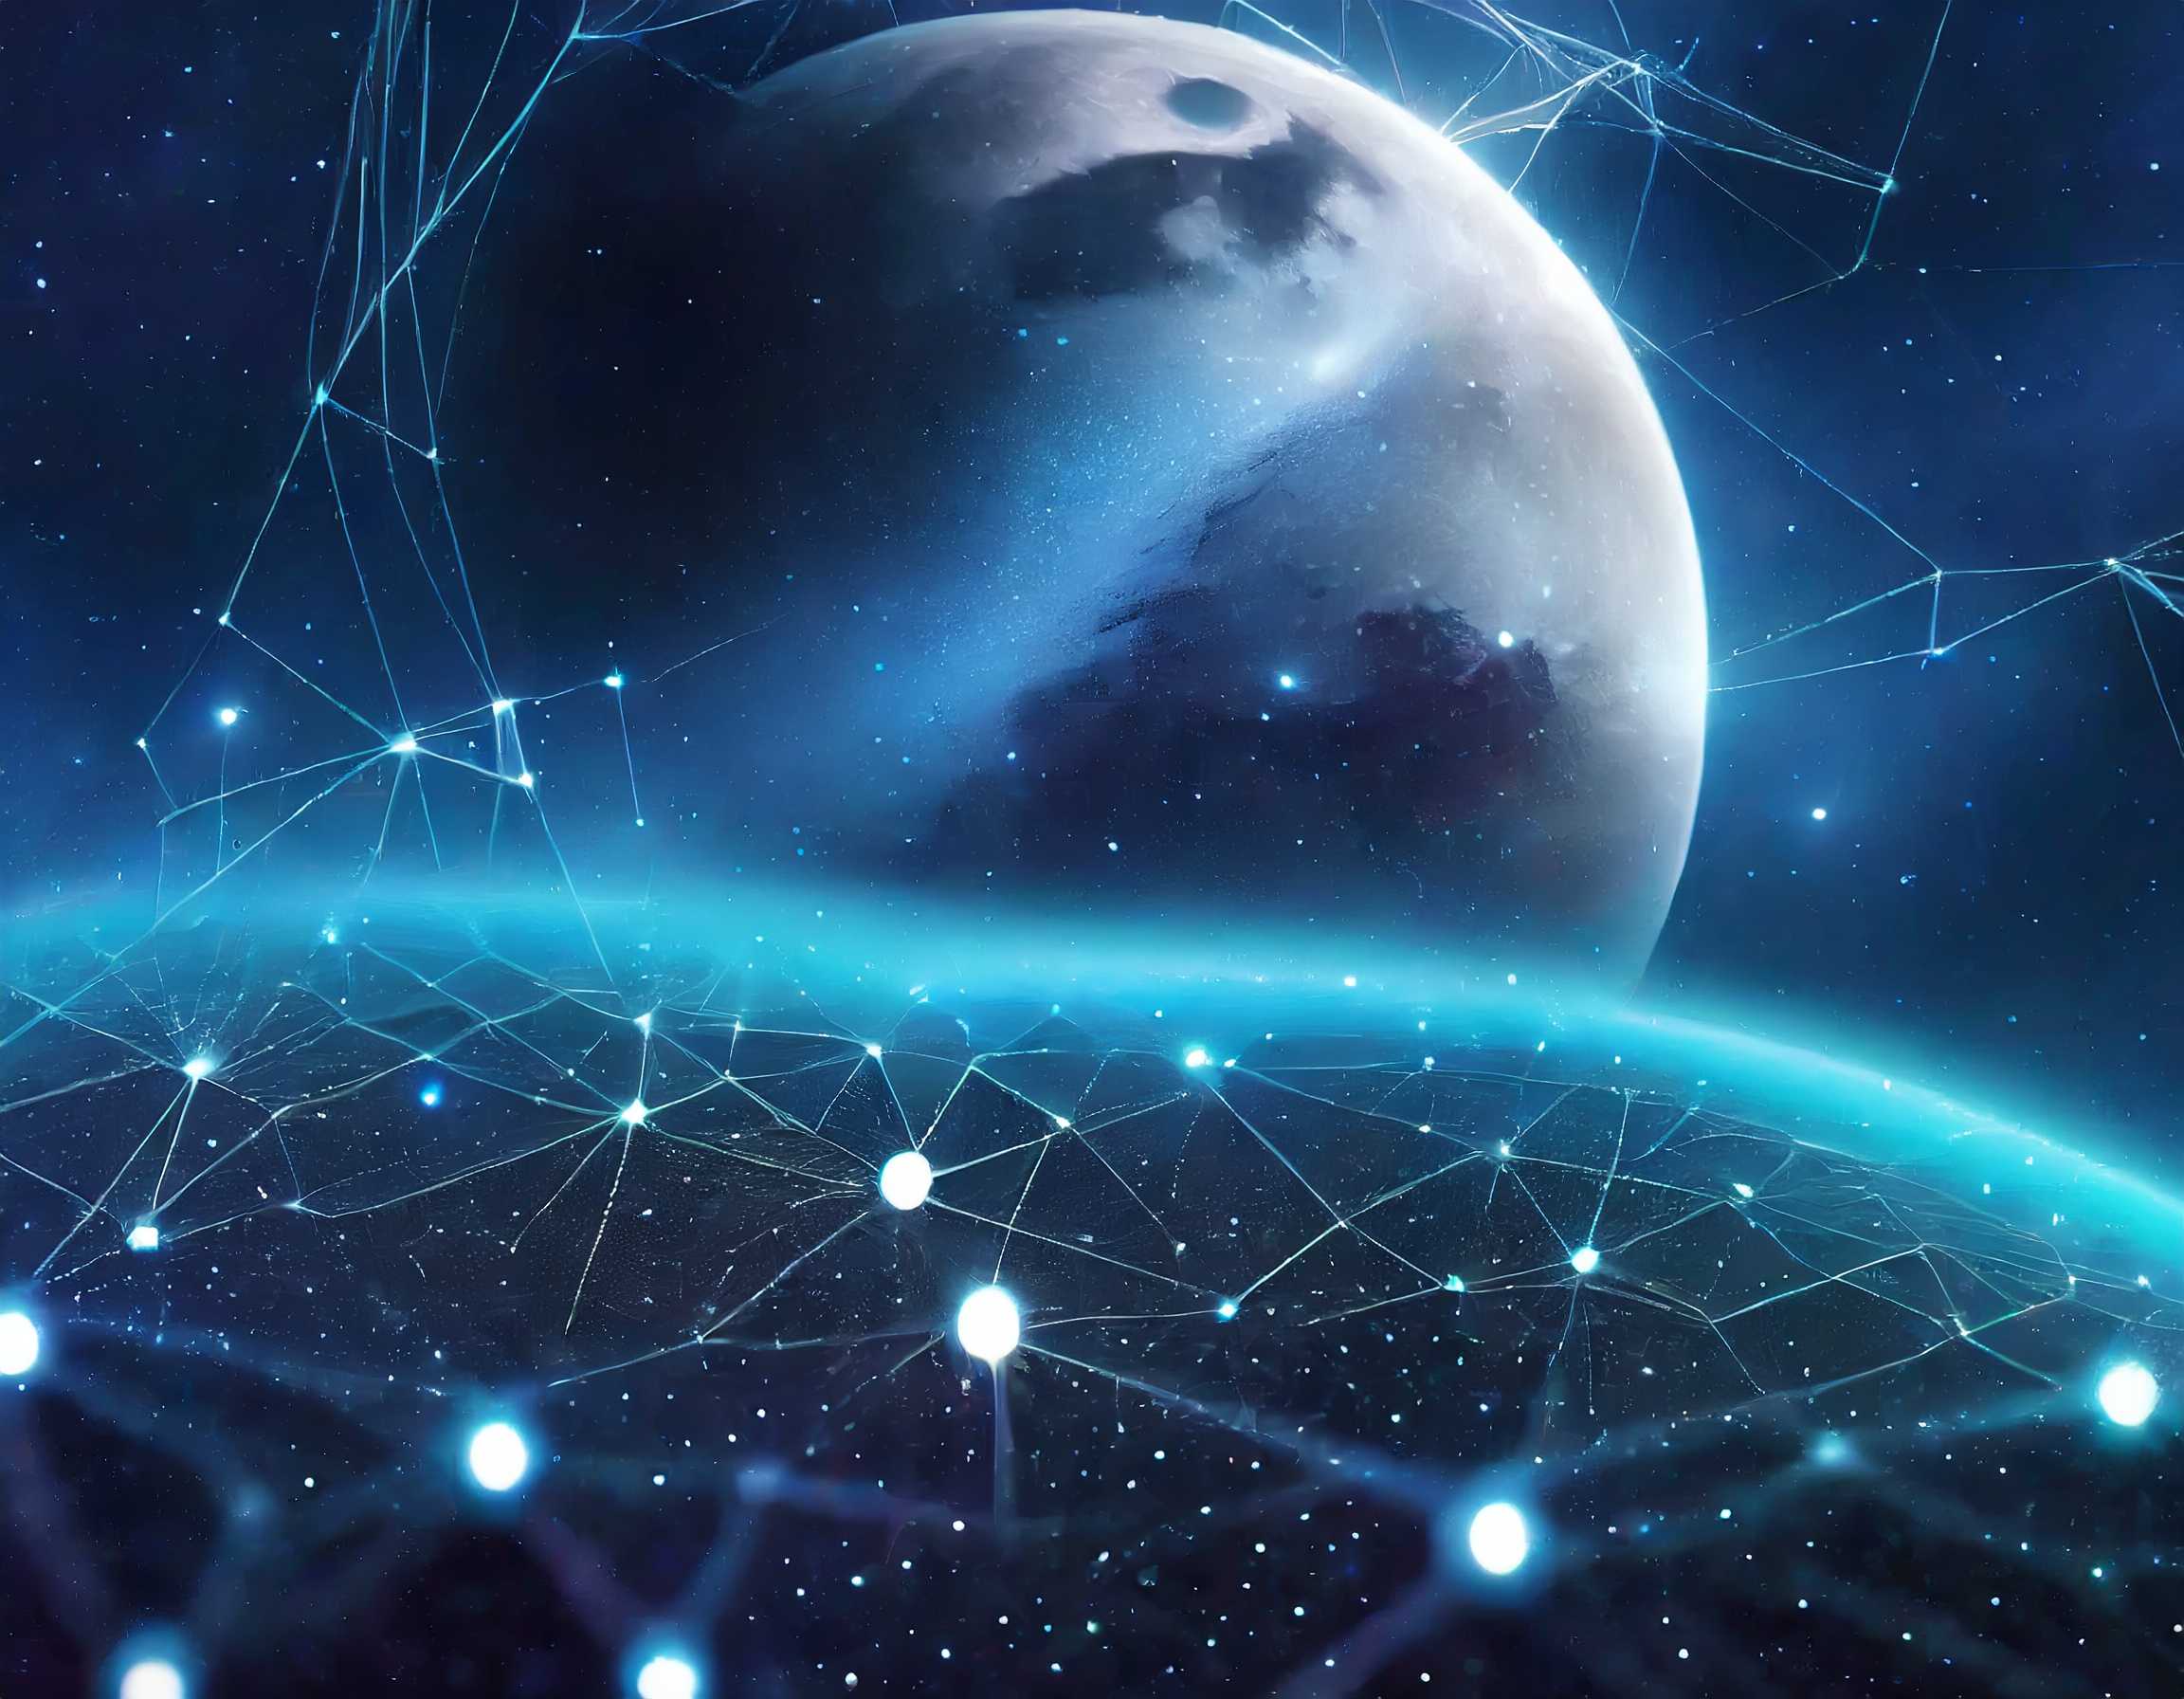 Firefly network in a galaxy, stars and moon in view, photo-realistic, octane rendering 41701